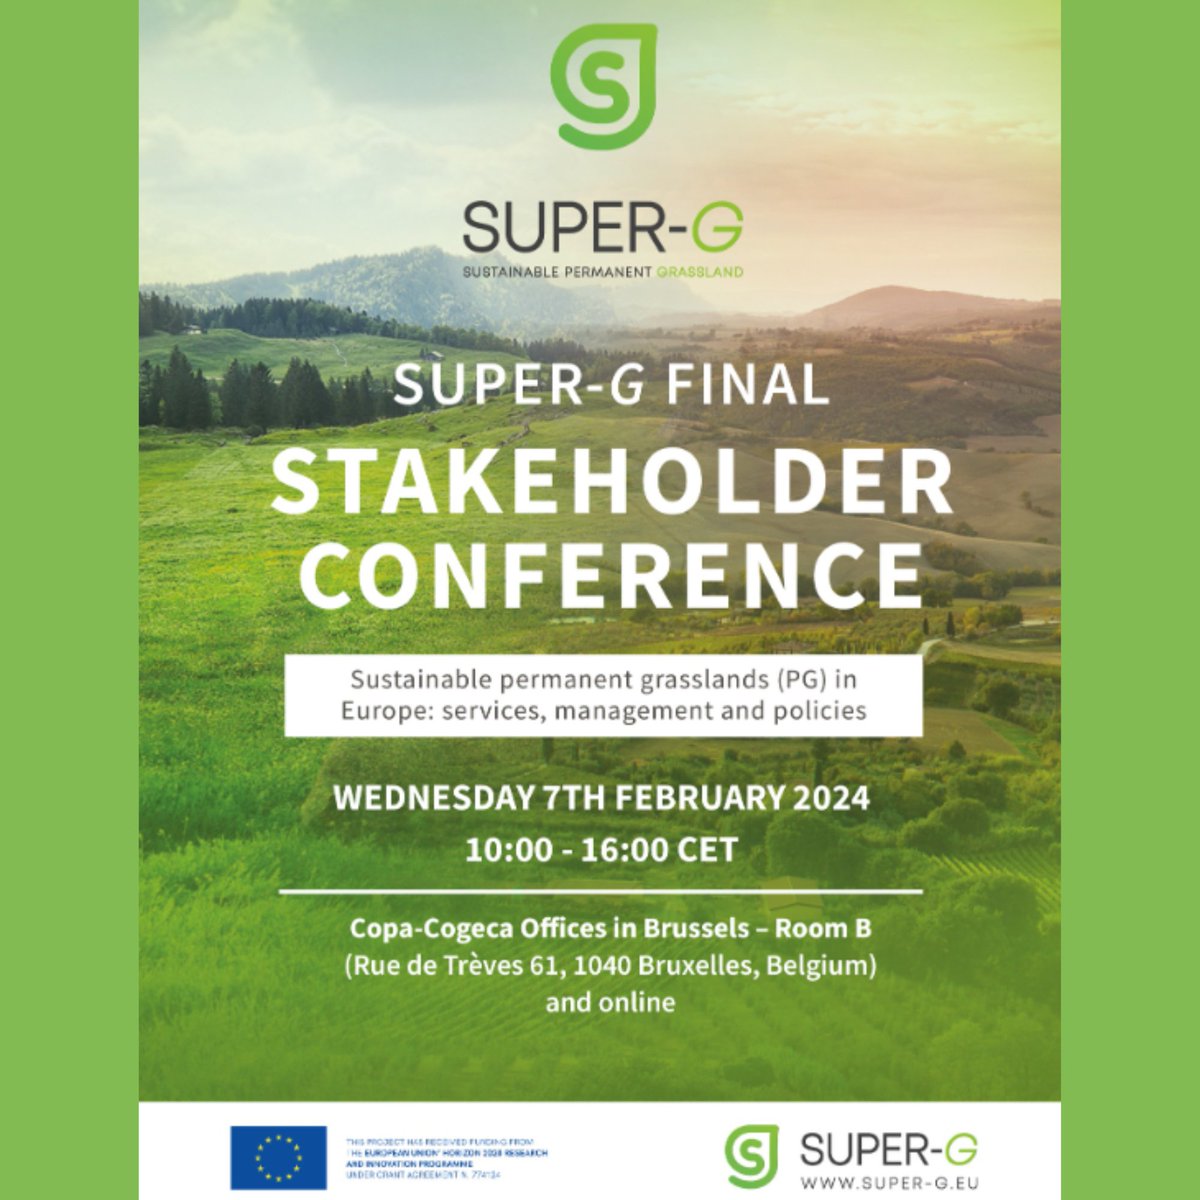 SUPER-G final stakeholder conference will be on 7th February 2024! Join us in Brussels or online to discuss #sustainable permanent grassland systems. Registration deadline is 26th January, so don't miss the opportunity and register here: ow.ly/uer850QiLBr. #superg #h2020